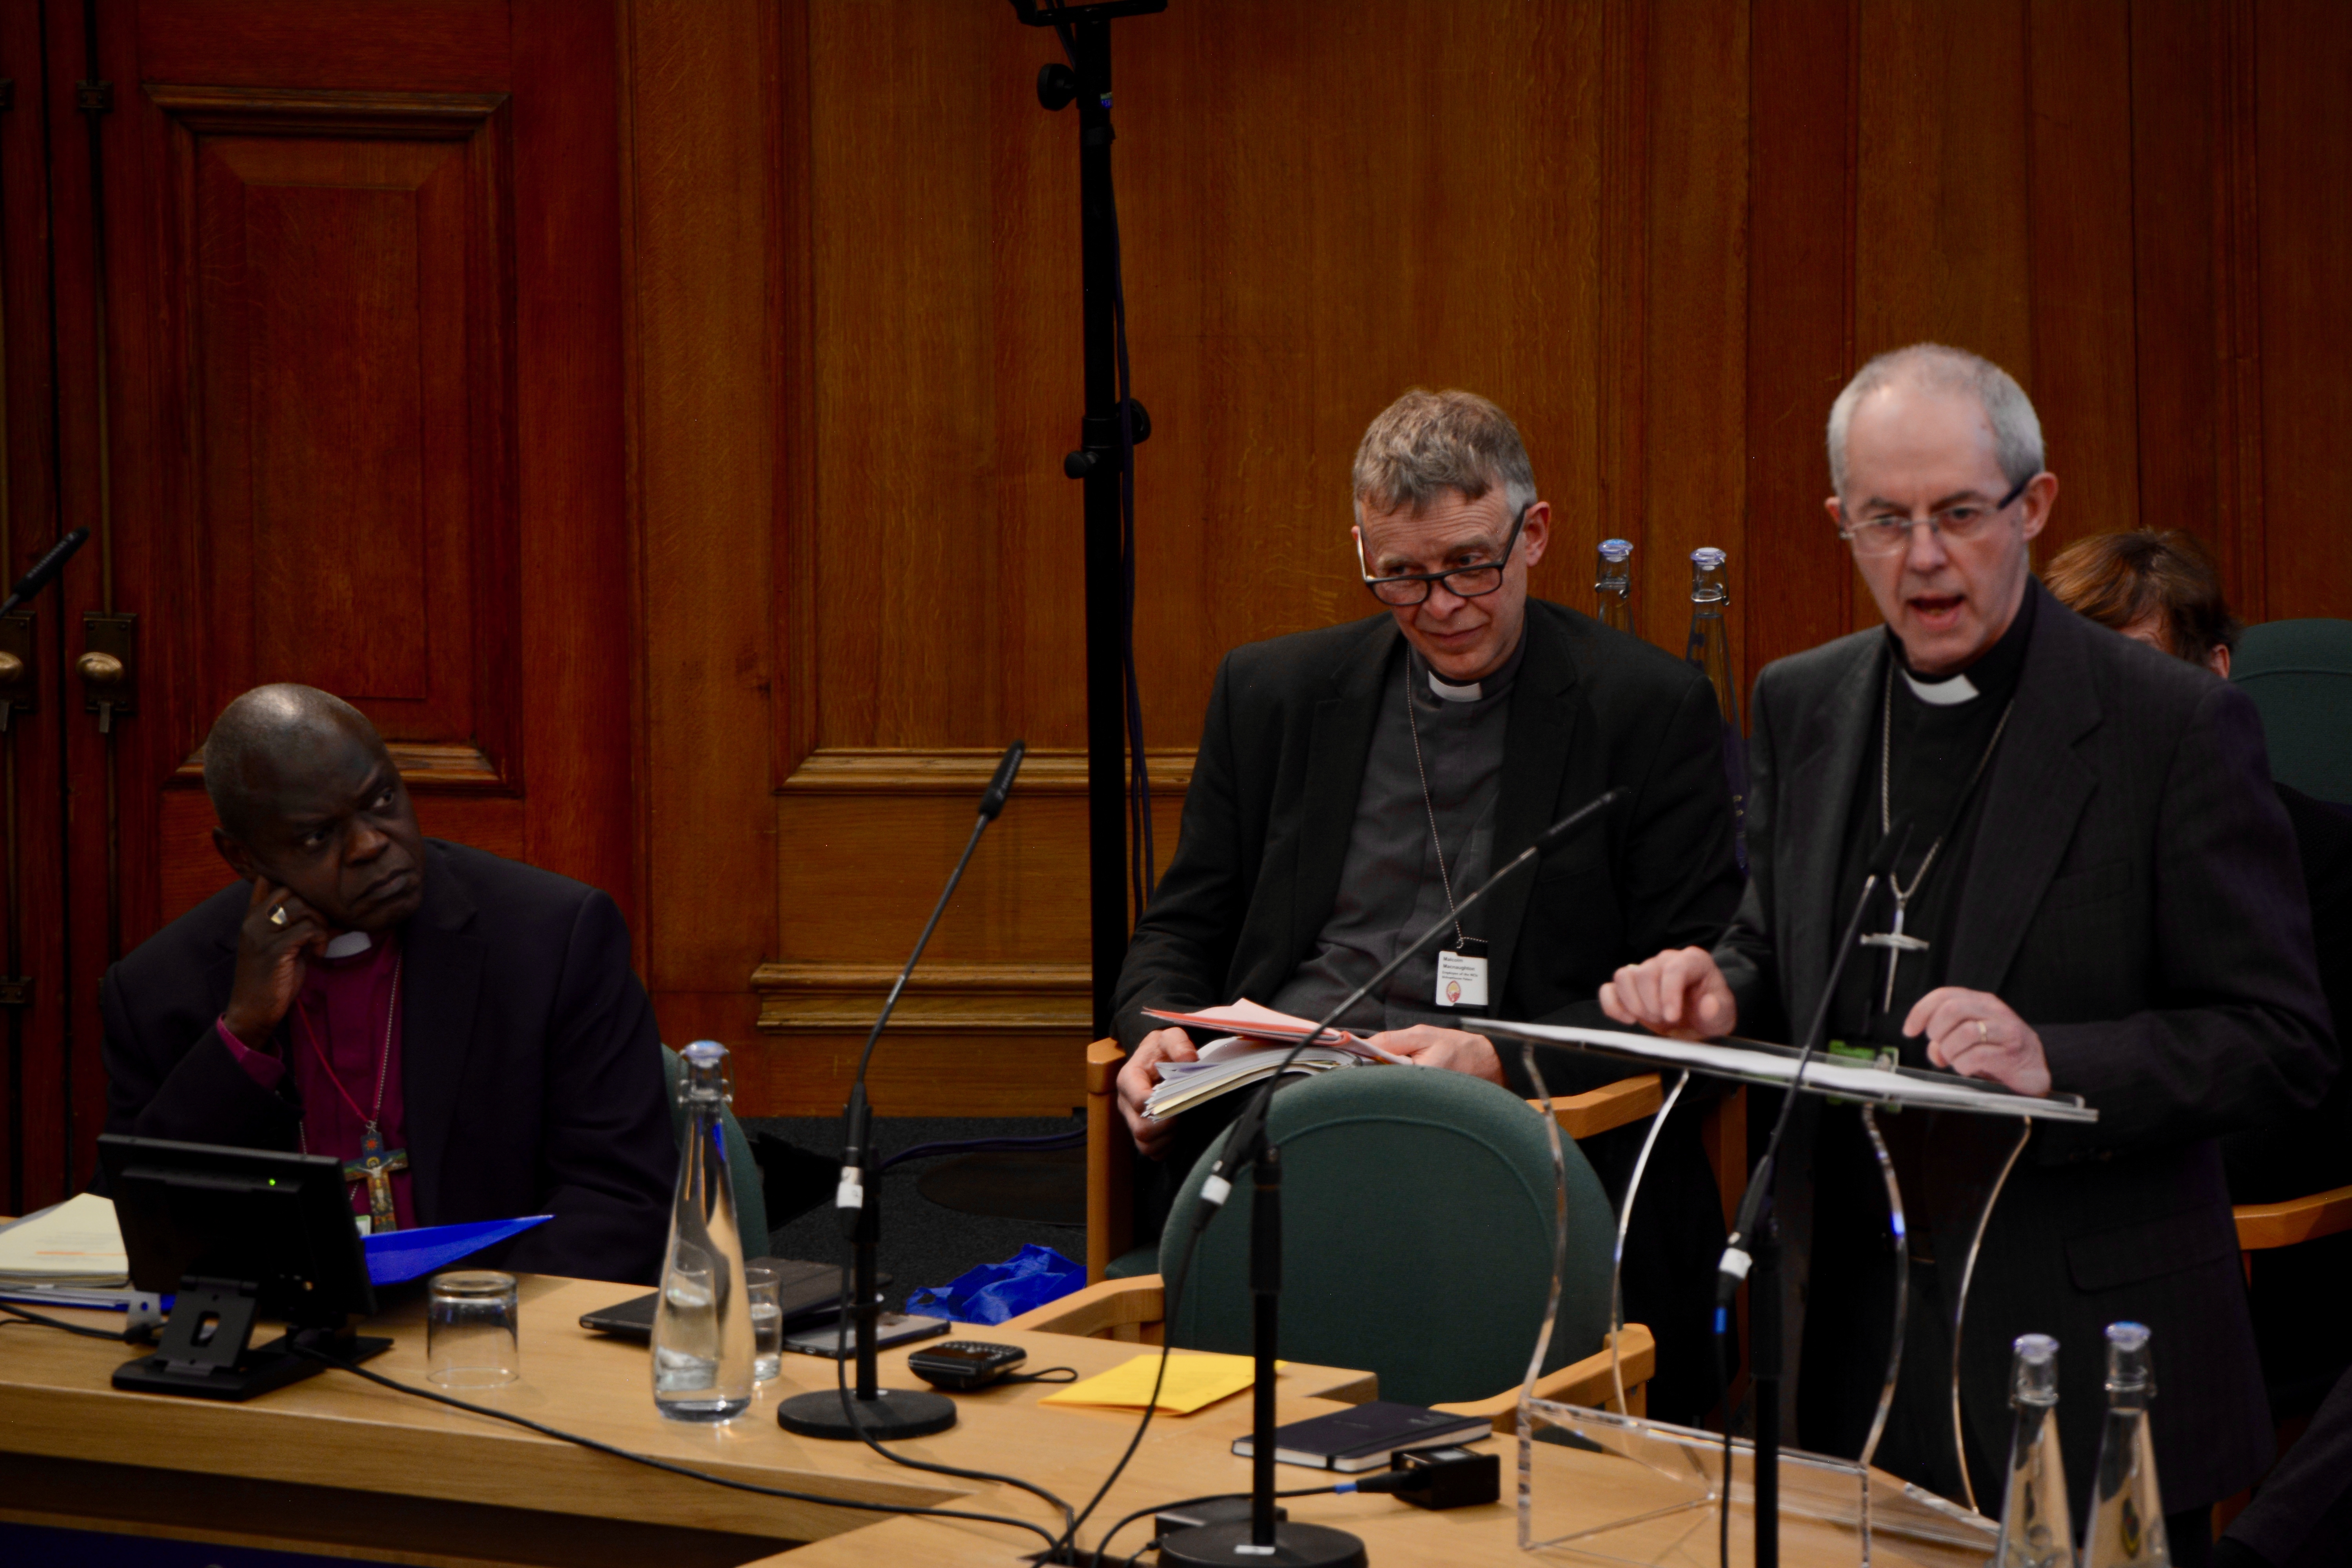 Church of England must rise to the challenge of change, says Welby